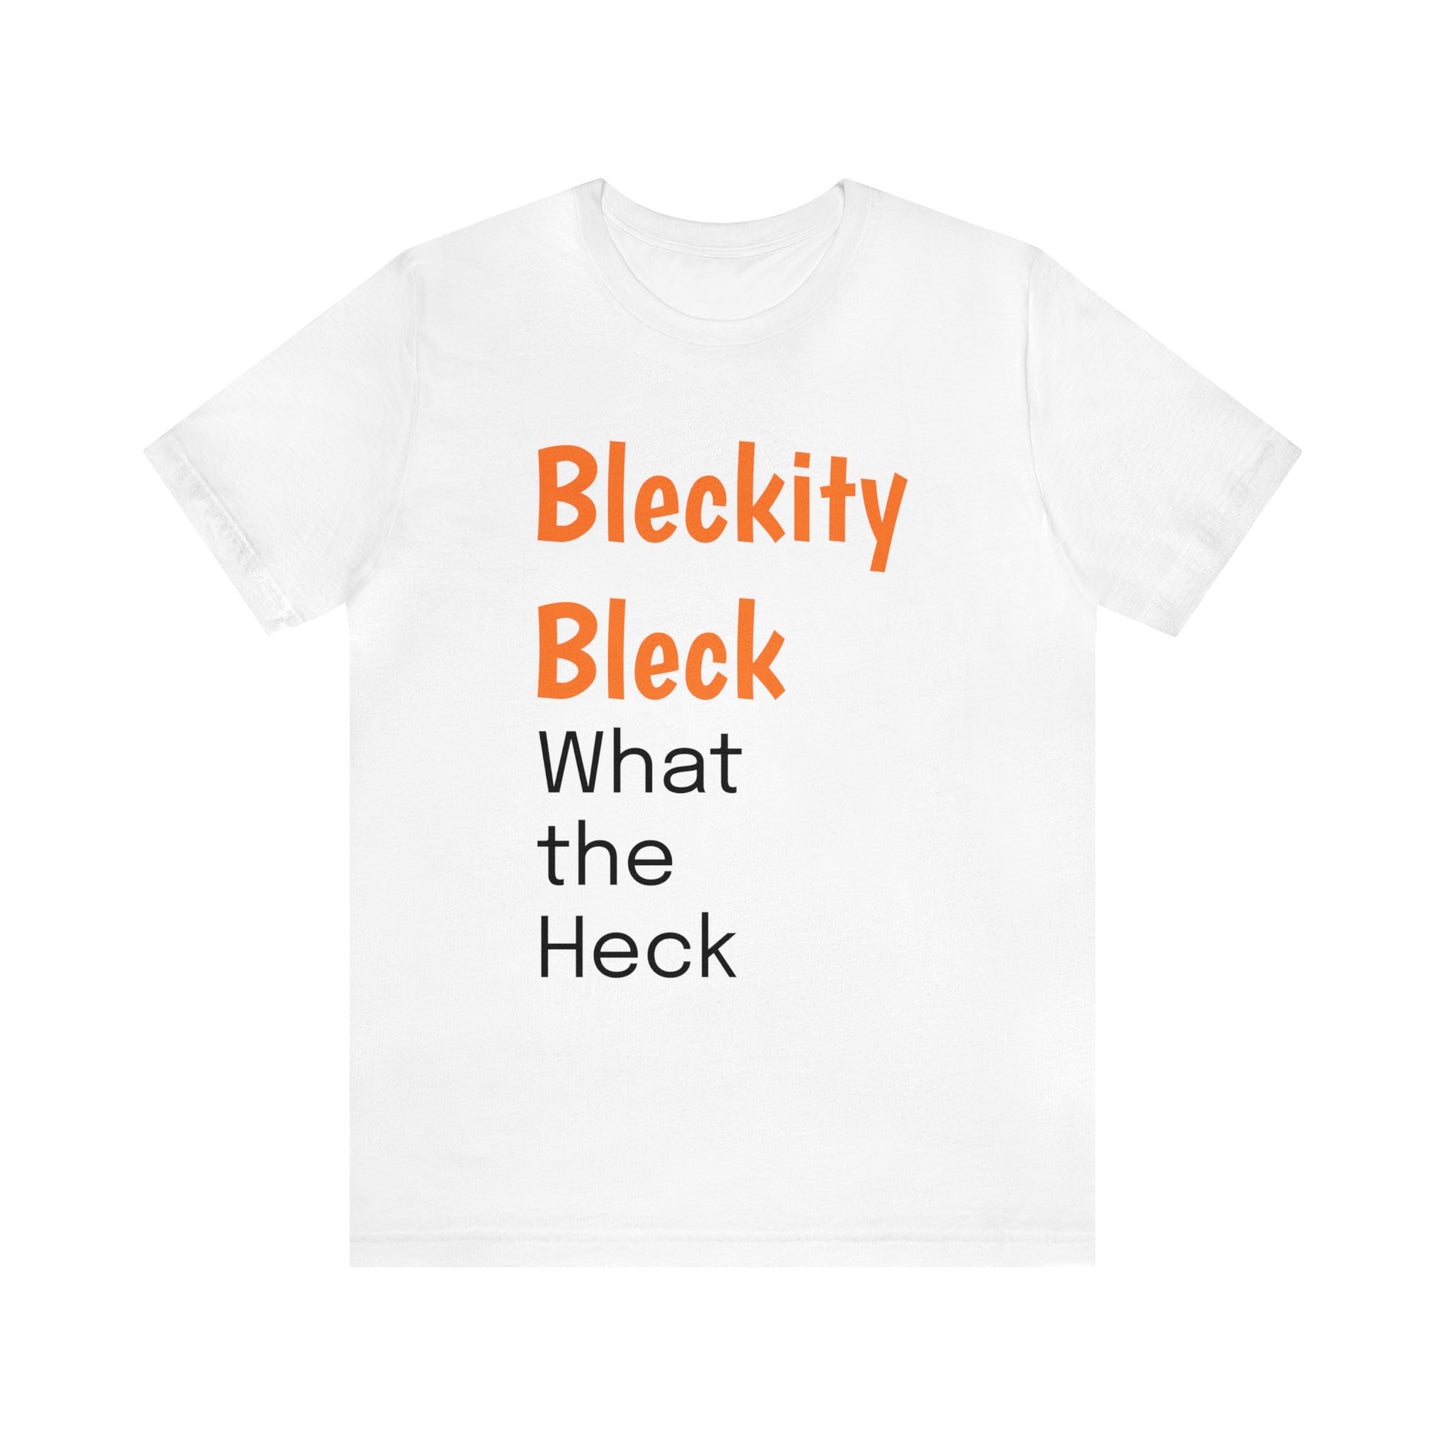 Chrisism No. 4 - Bleckity Bleck, What the Heck